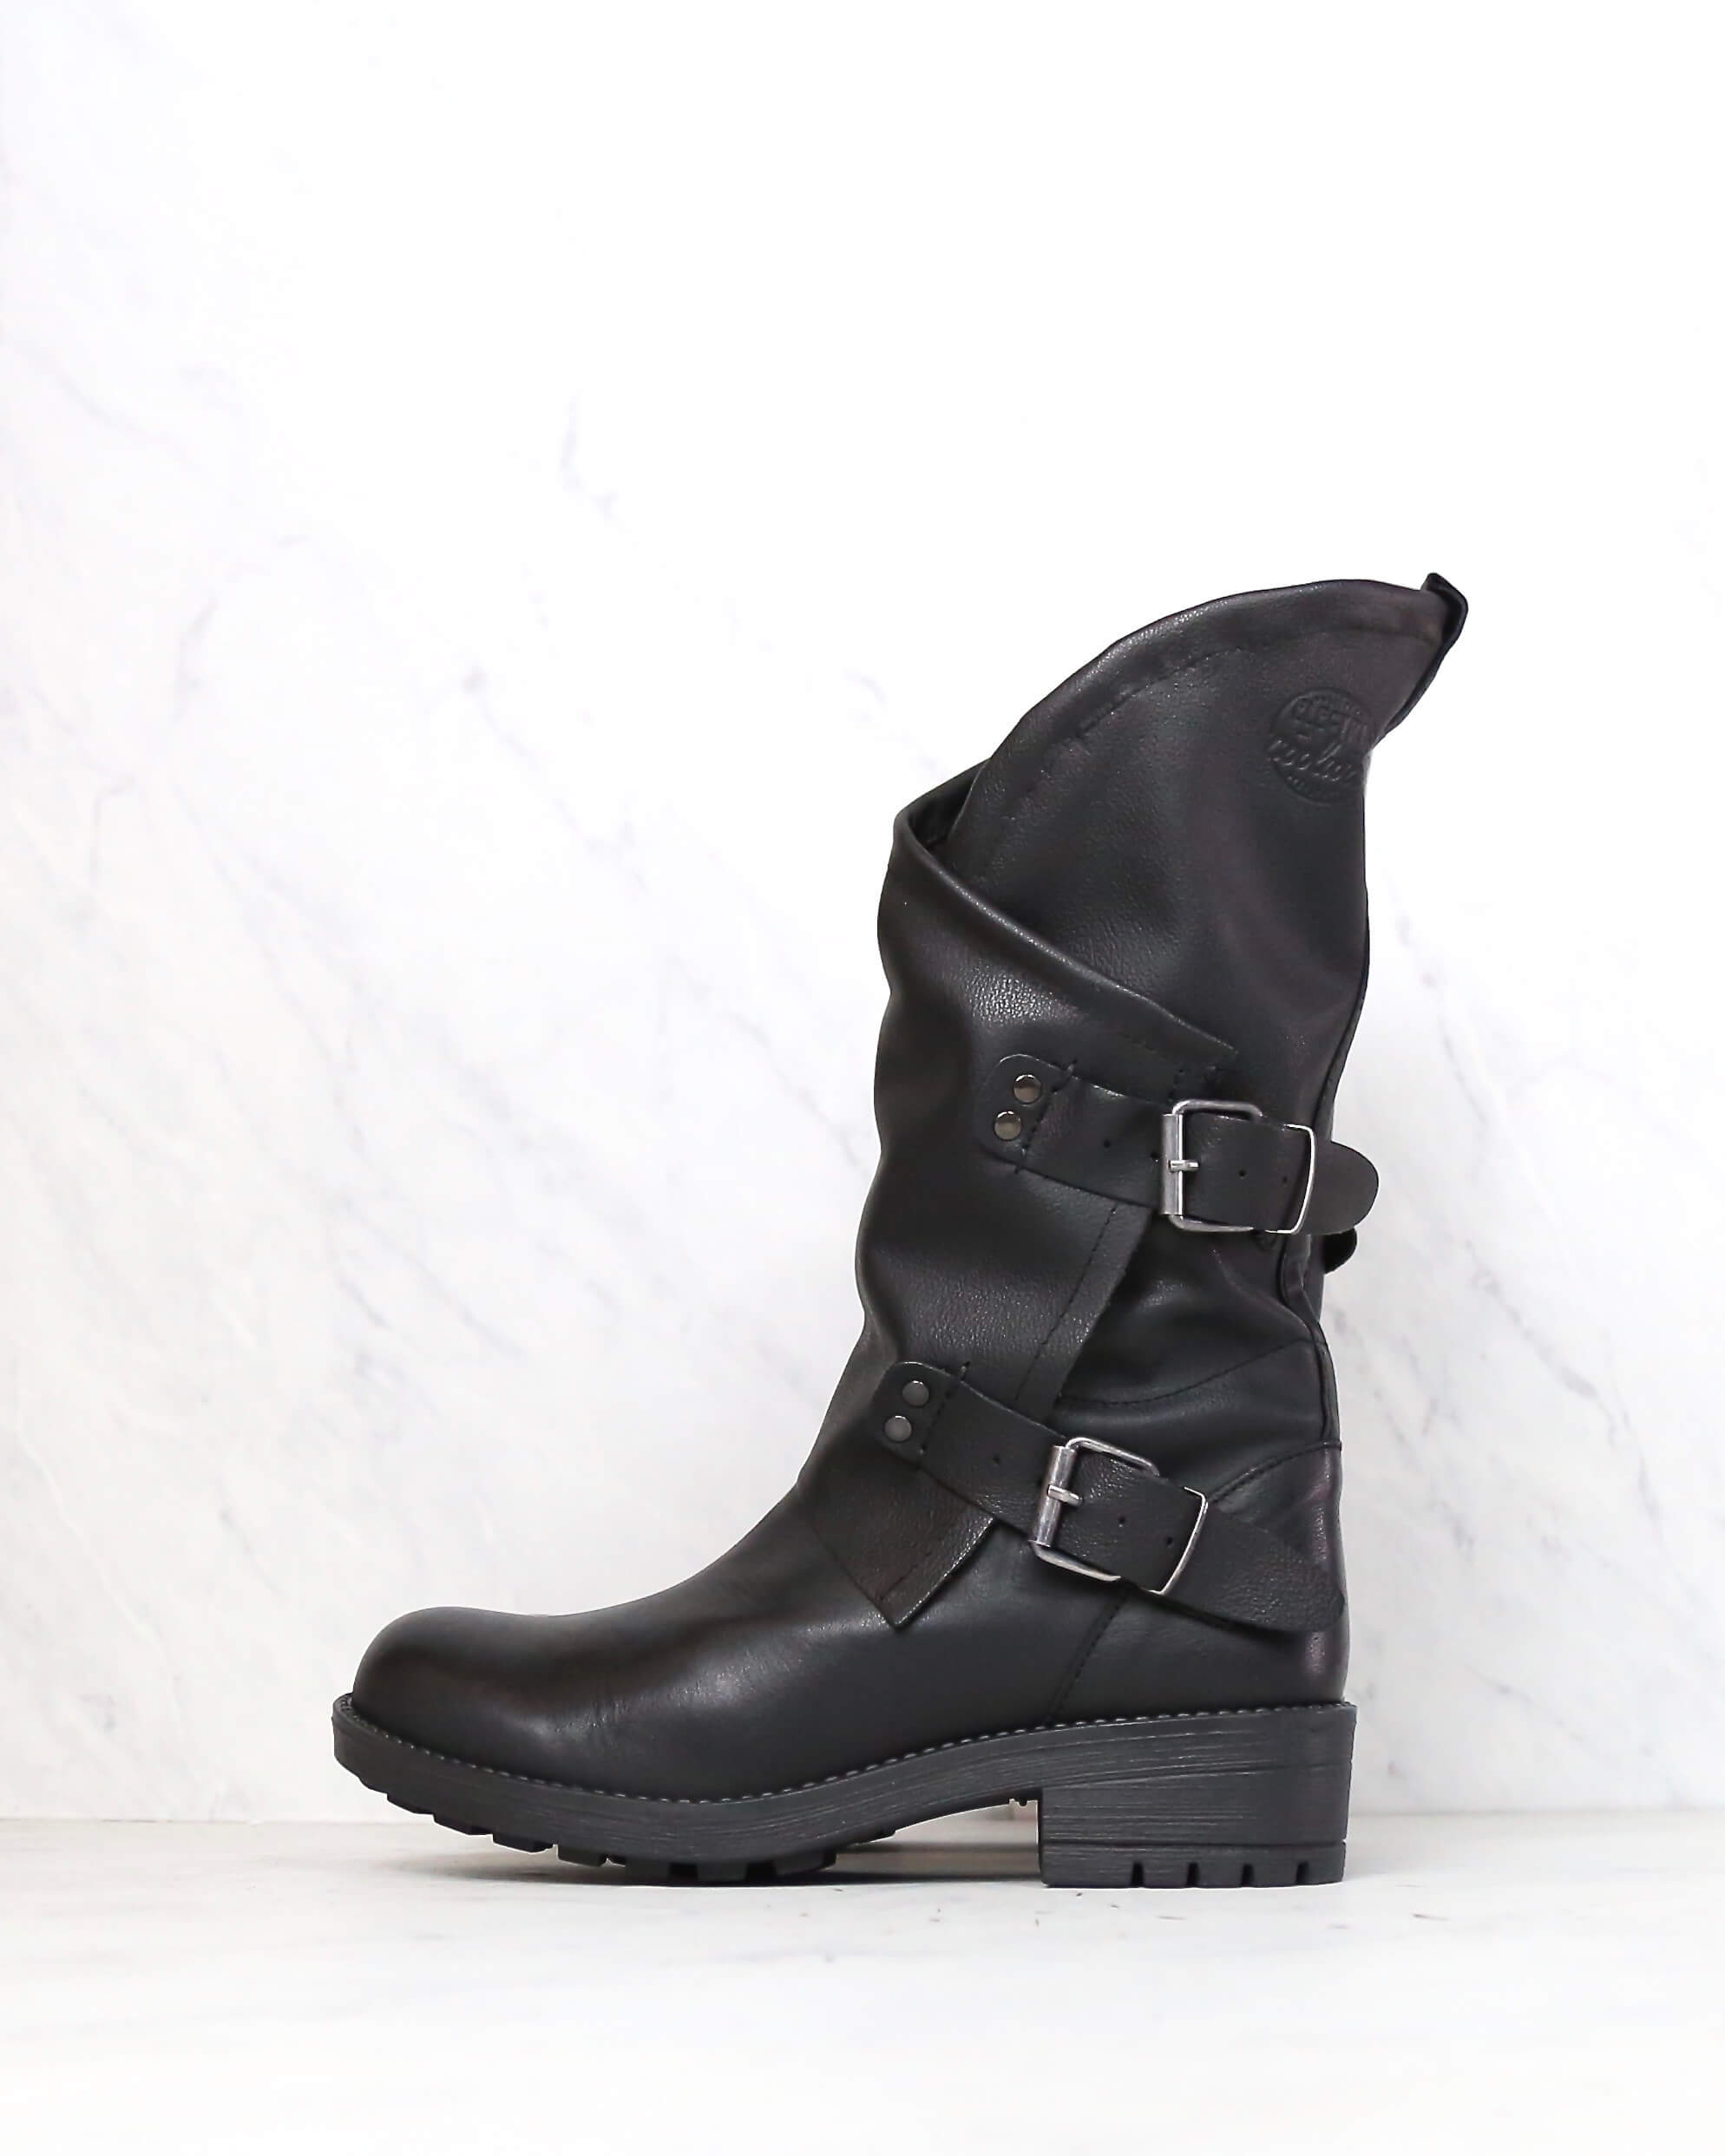 Alida Leather Motorcycle Boots in Black 